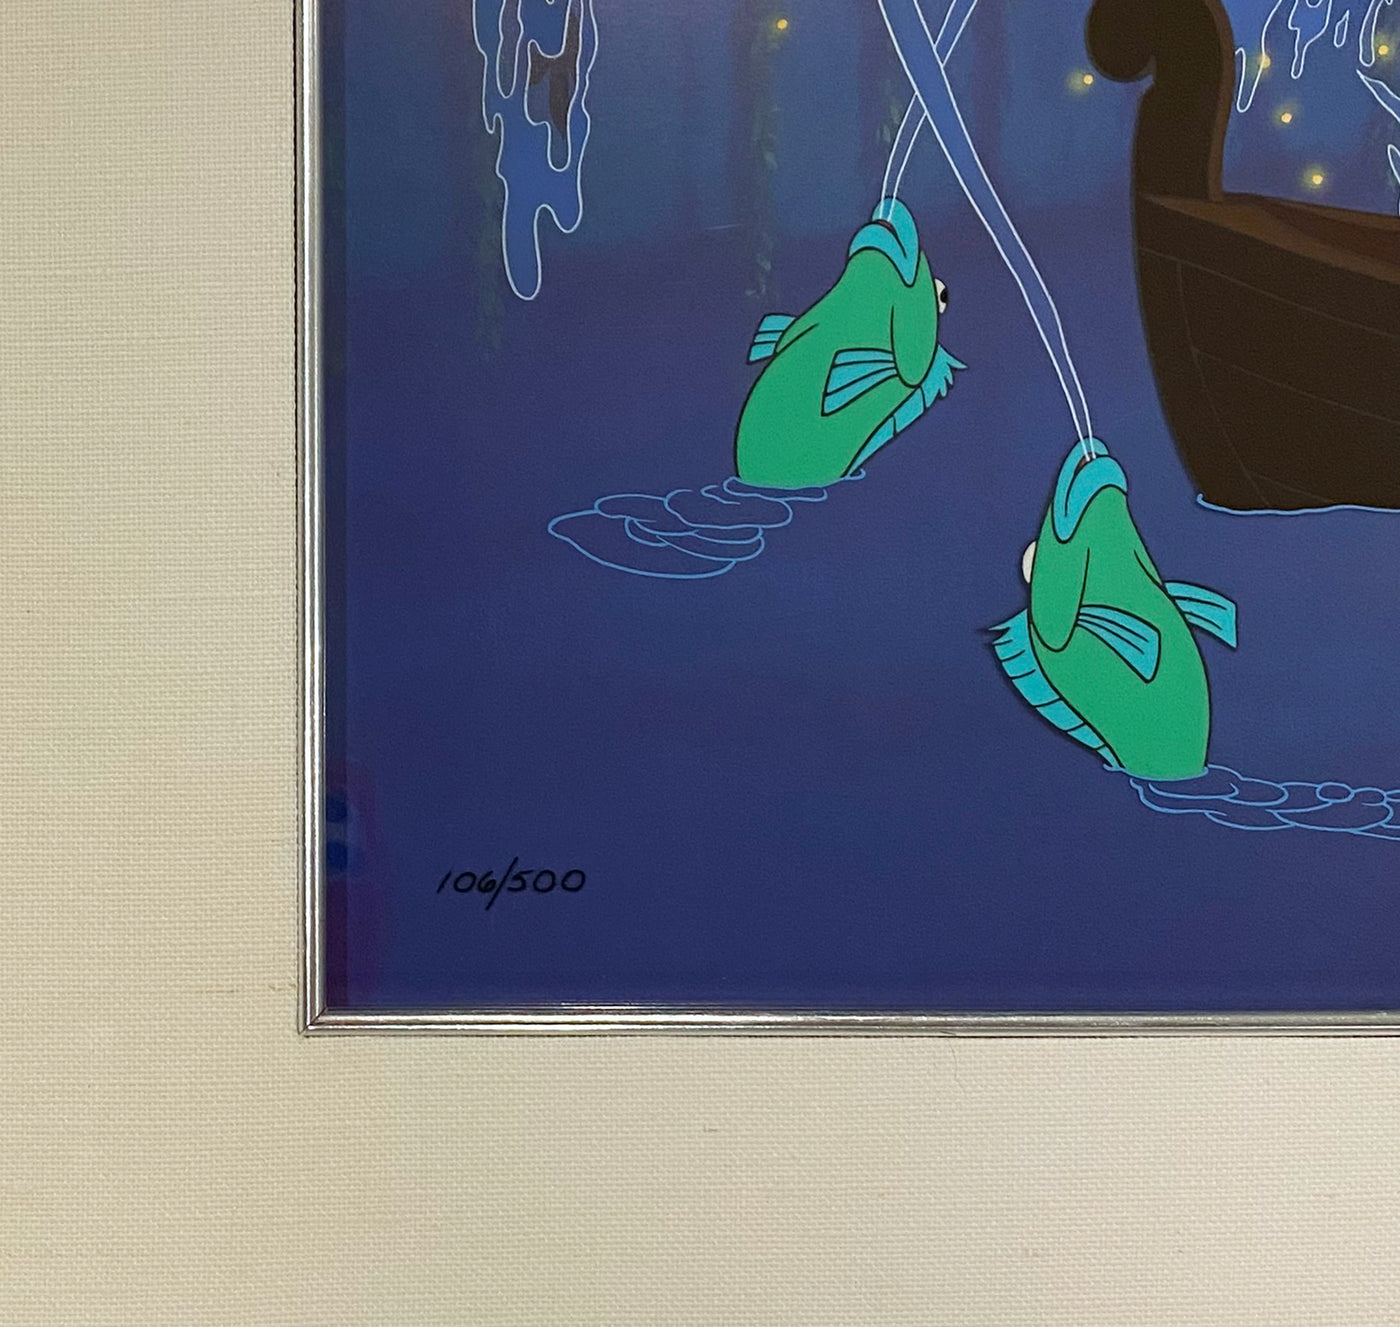 Original Walt Disney The Little Mermaid Limited Edition Cel "Kiss the Girl" featuring Ariel, Eric and Flounder